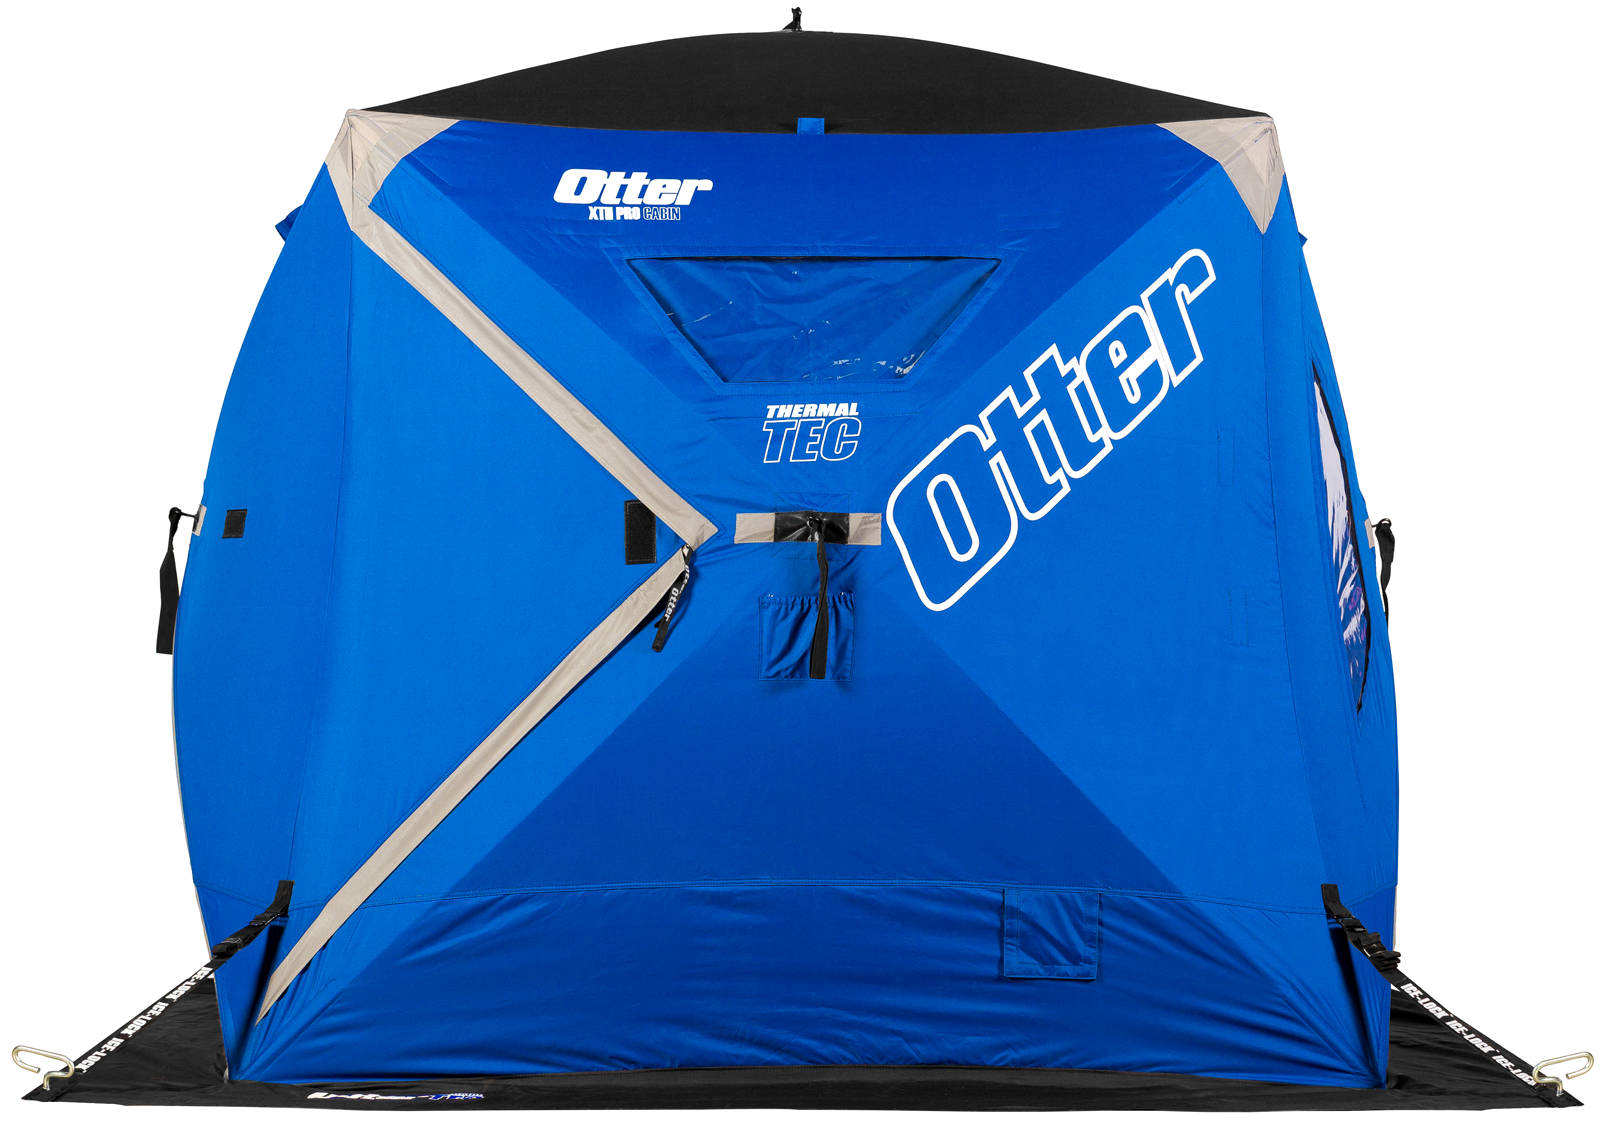 Otter XTH Cabin Pop-Up Shelter